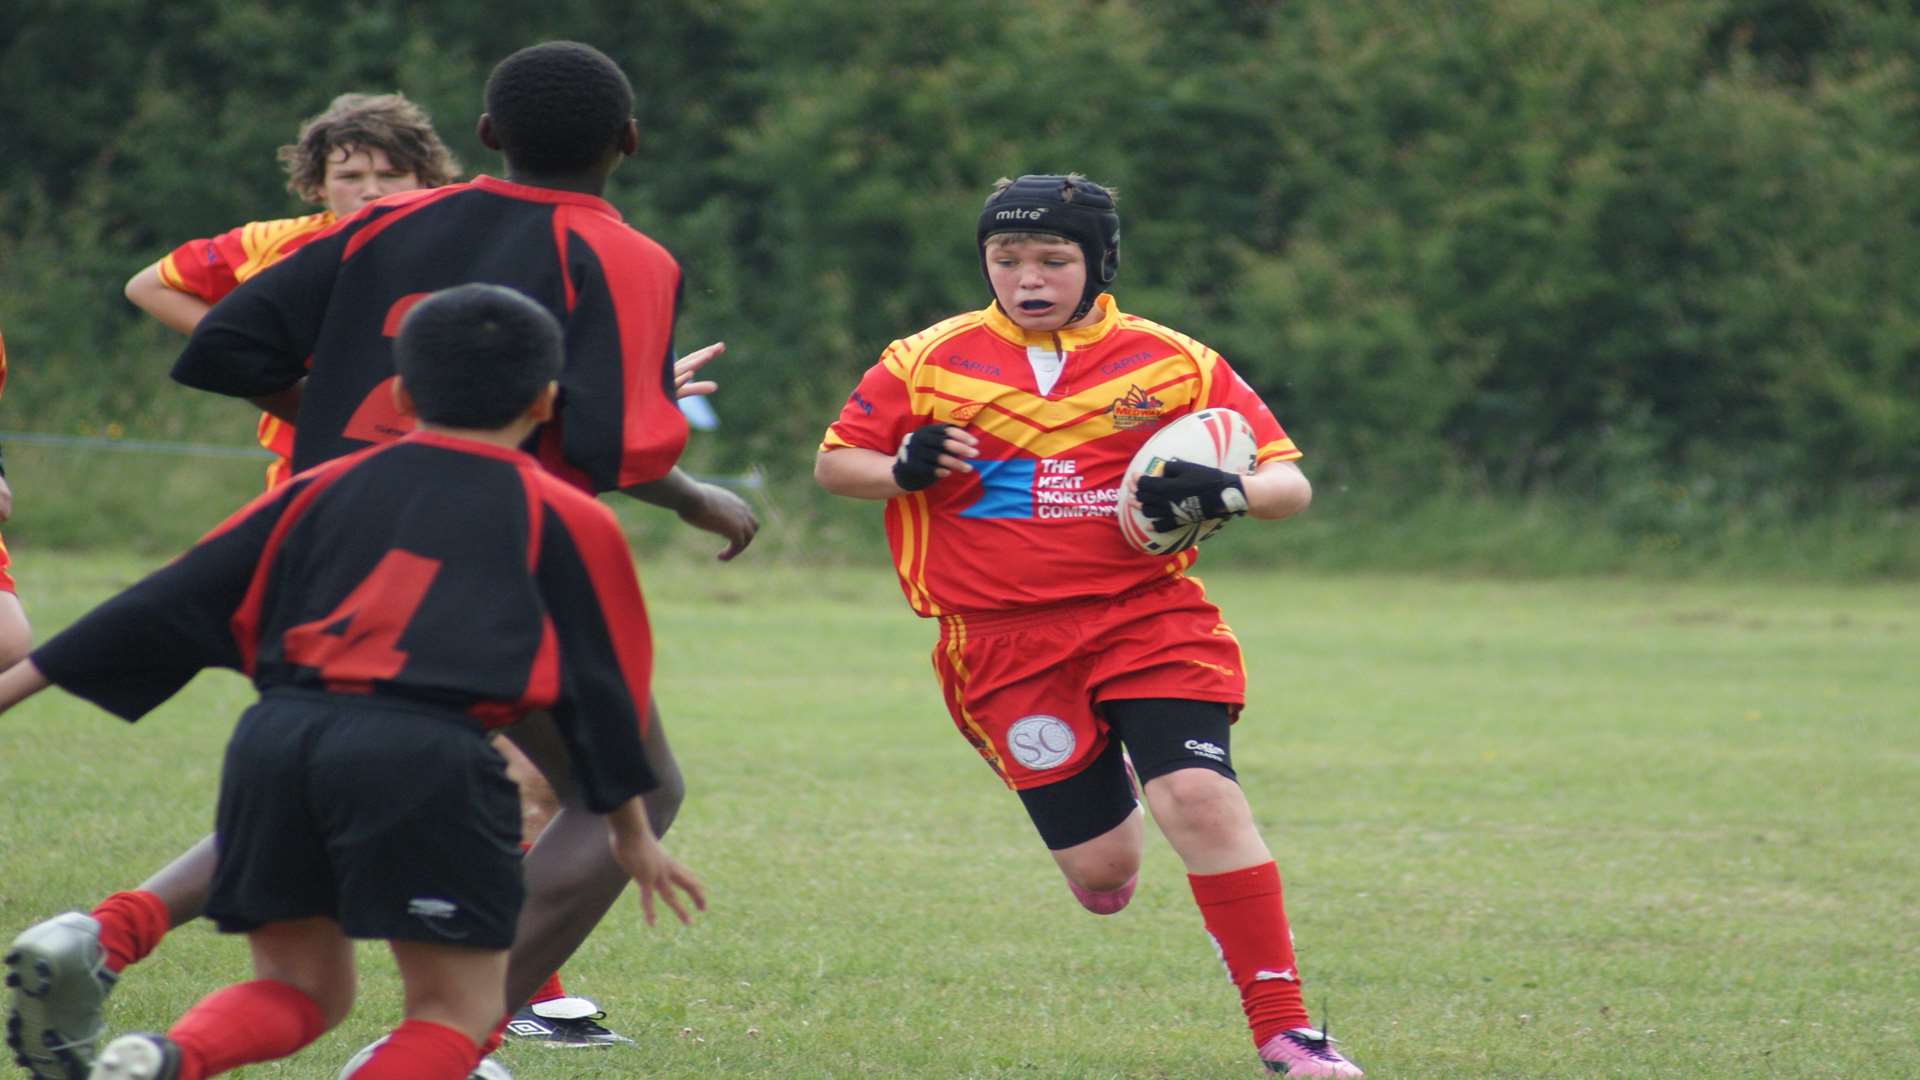 Robert Butler in action as a junior with the Medway Dragons